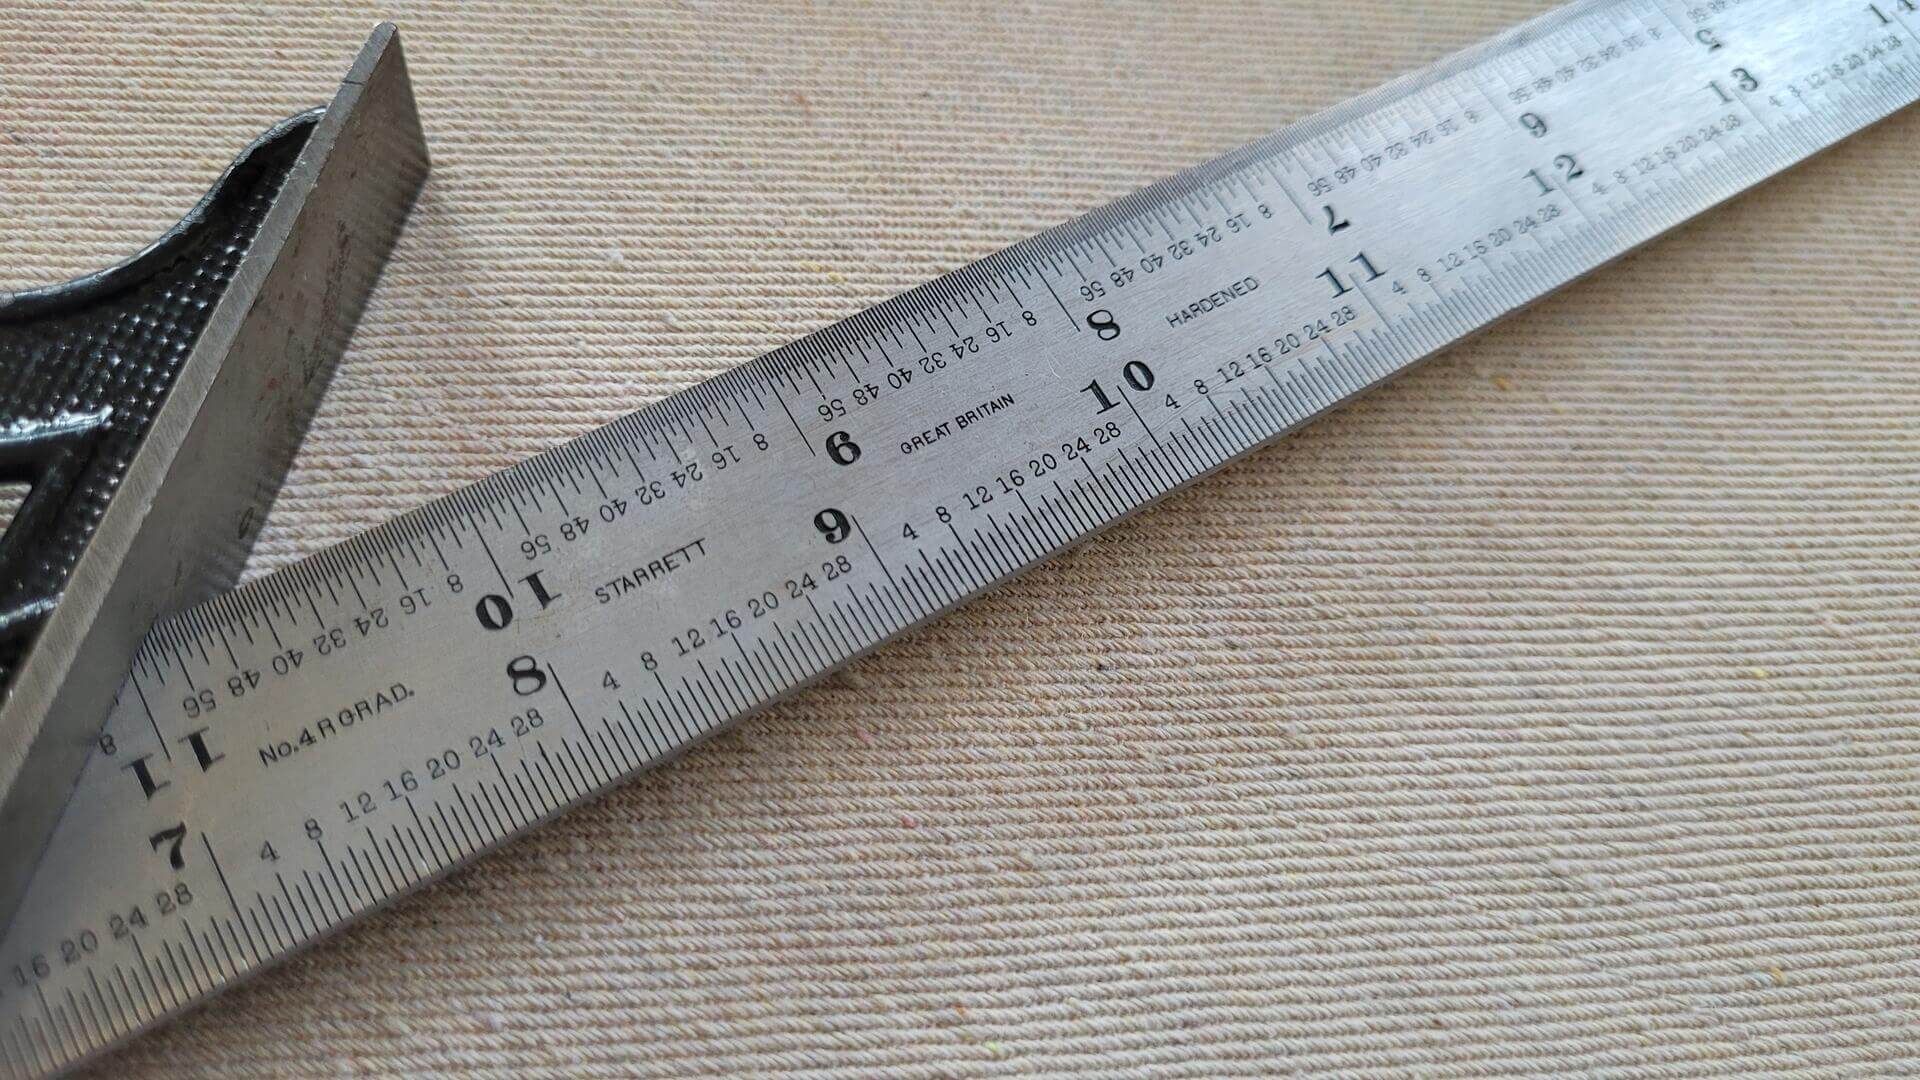 Starrett combination square No. 4R Grad hardened steel rule with 18" rule imperial scale. Vintage made in Great Britain marking & measuring machinist tools